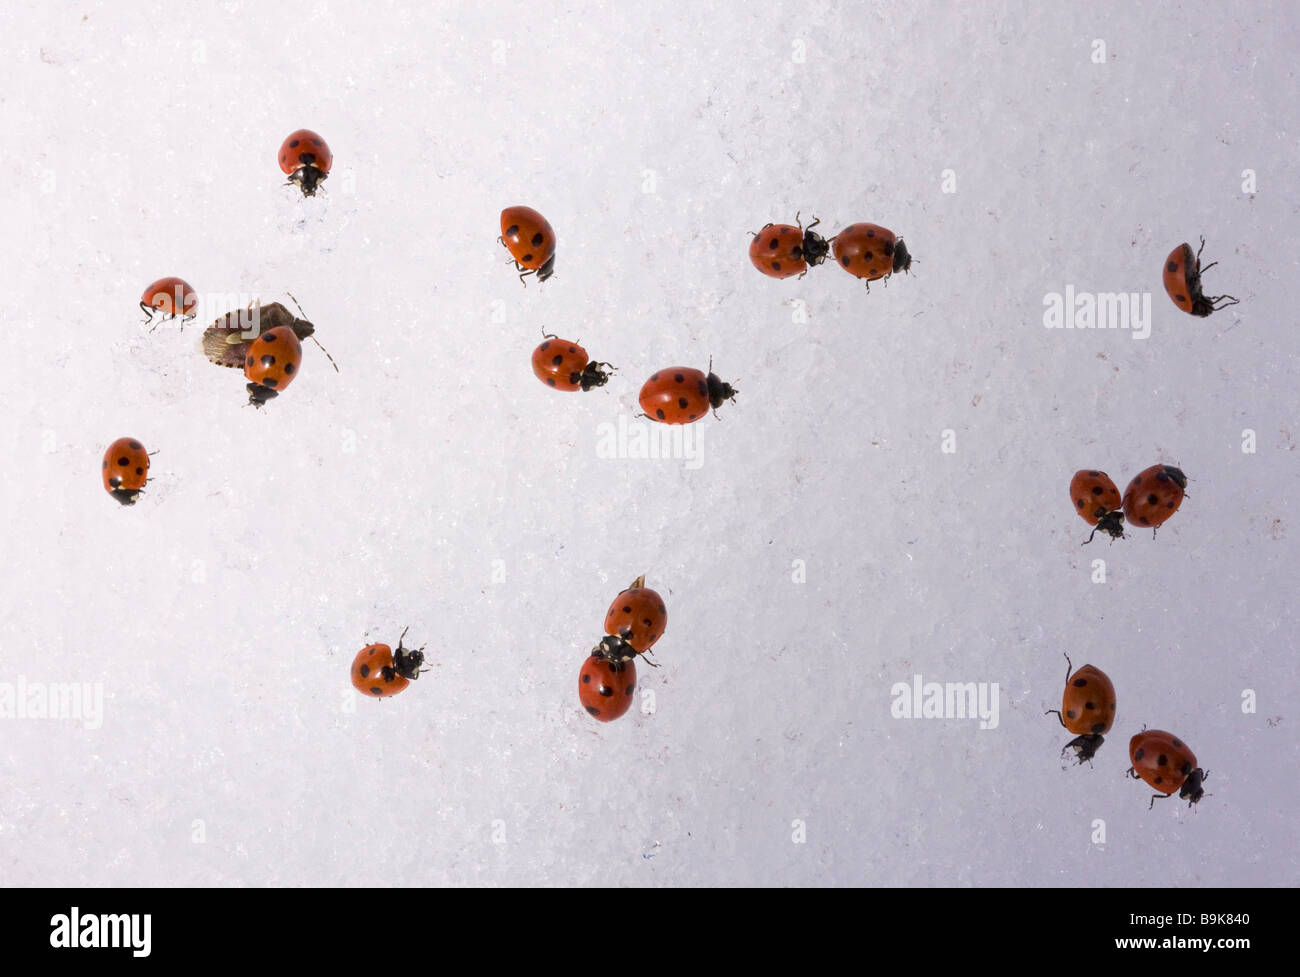 7-spot ladybirds Coccinella septempunctata gathered en masse in the snow at 2000 metres in the Middle Atlas Mountains Morocco Stock Photo